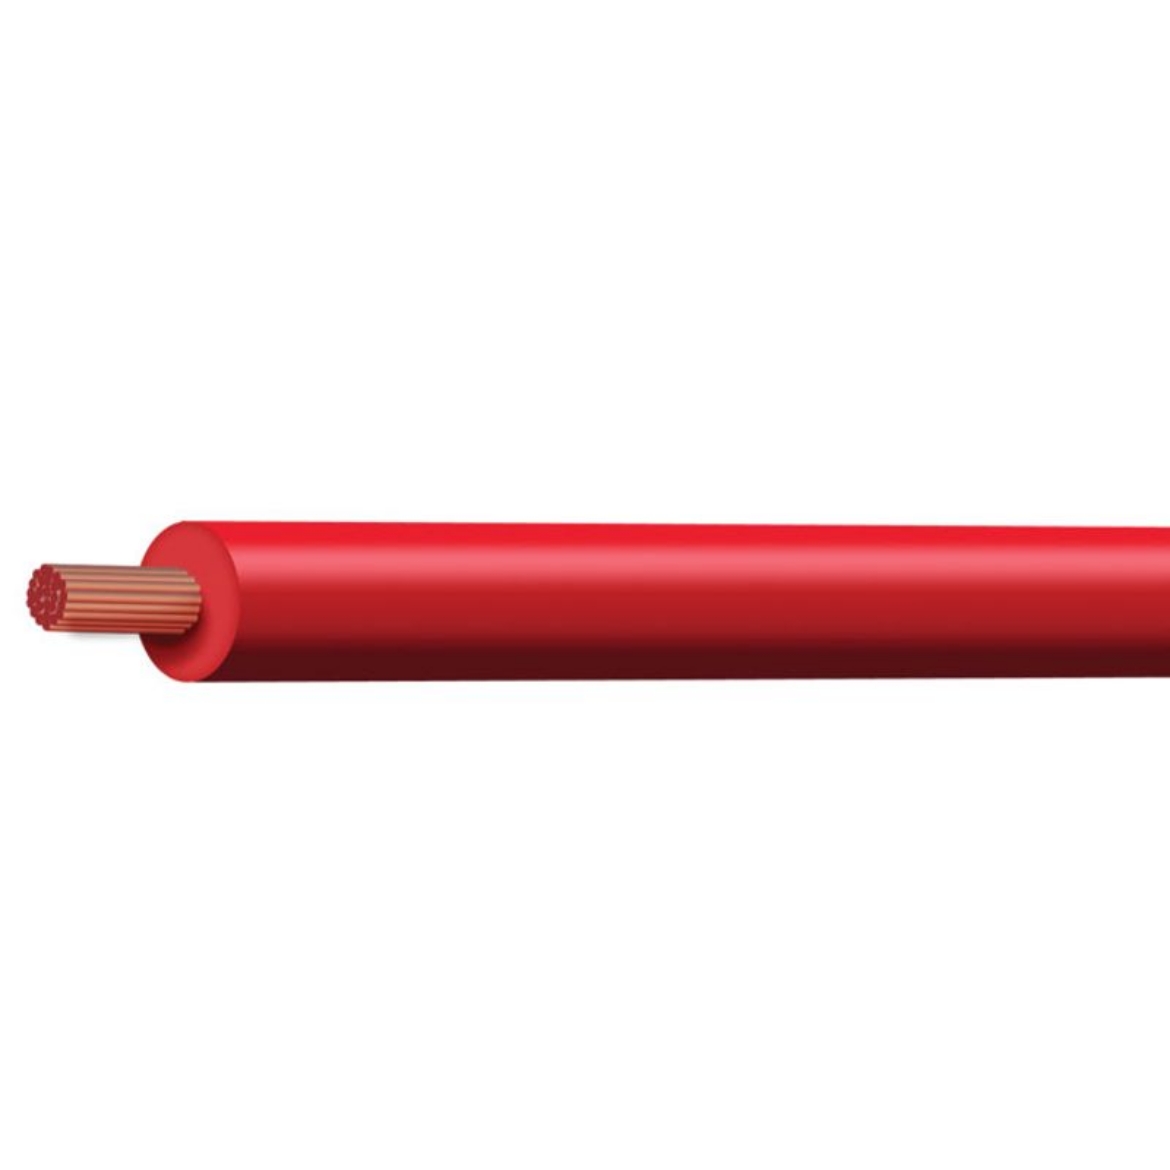 Picture of TYCAB SINGLE CORE CABLE BATTERY 00 B&S CROSS SECT 64MM SQ RATING 370A RED CUT - PER METER